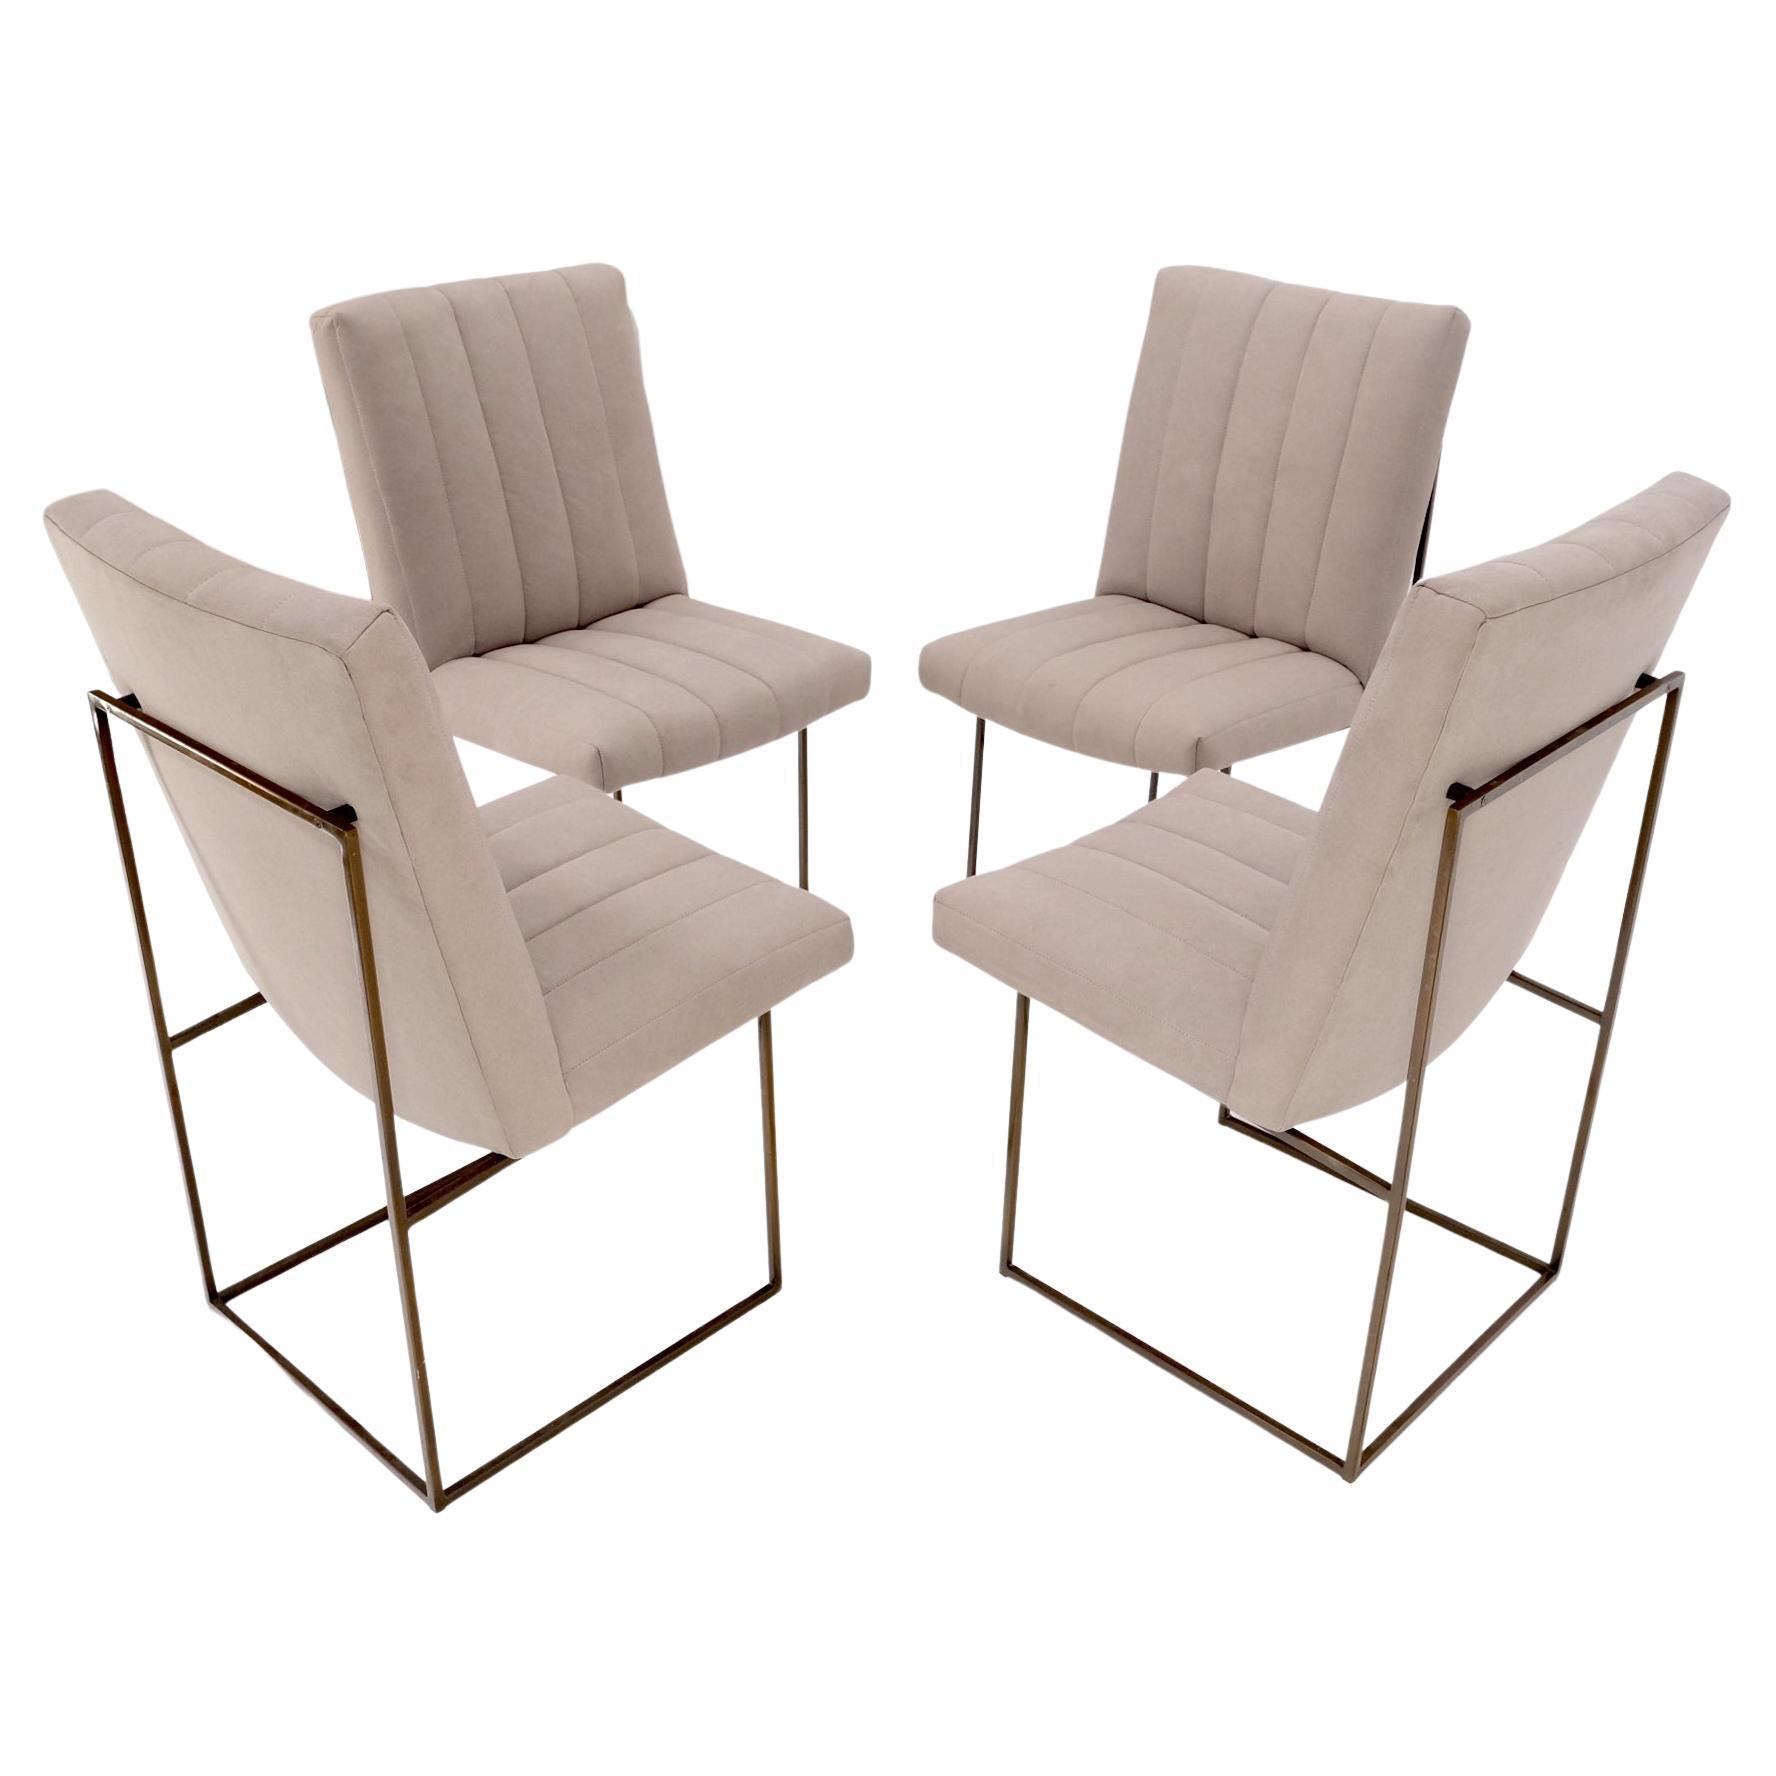 Set of 4 Milo Baughman Mid-Century Modern Dining Chairs New Alcantera Upholstery For Sale